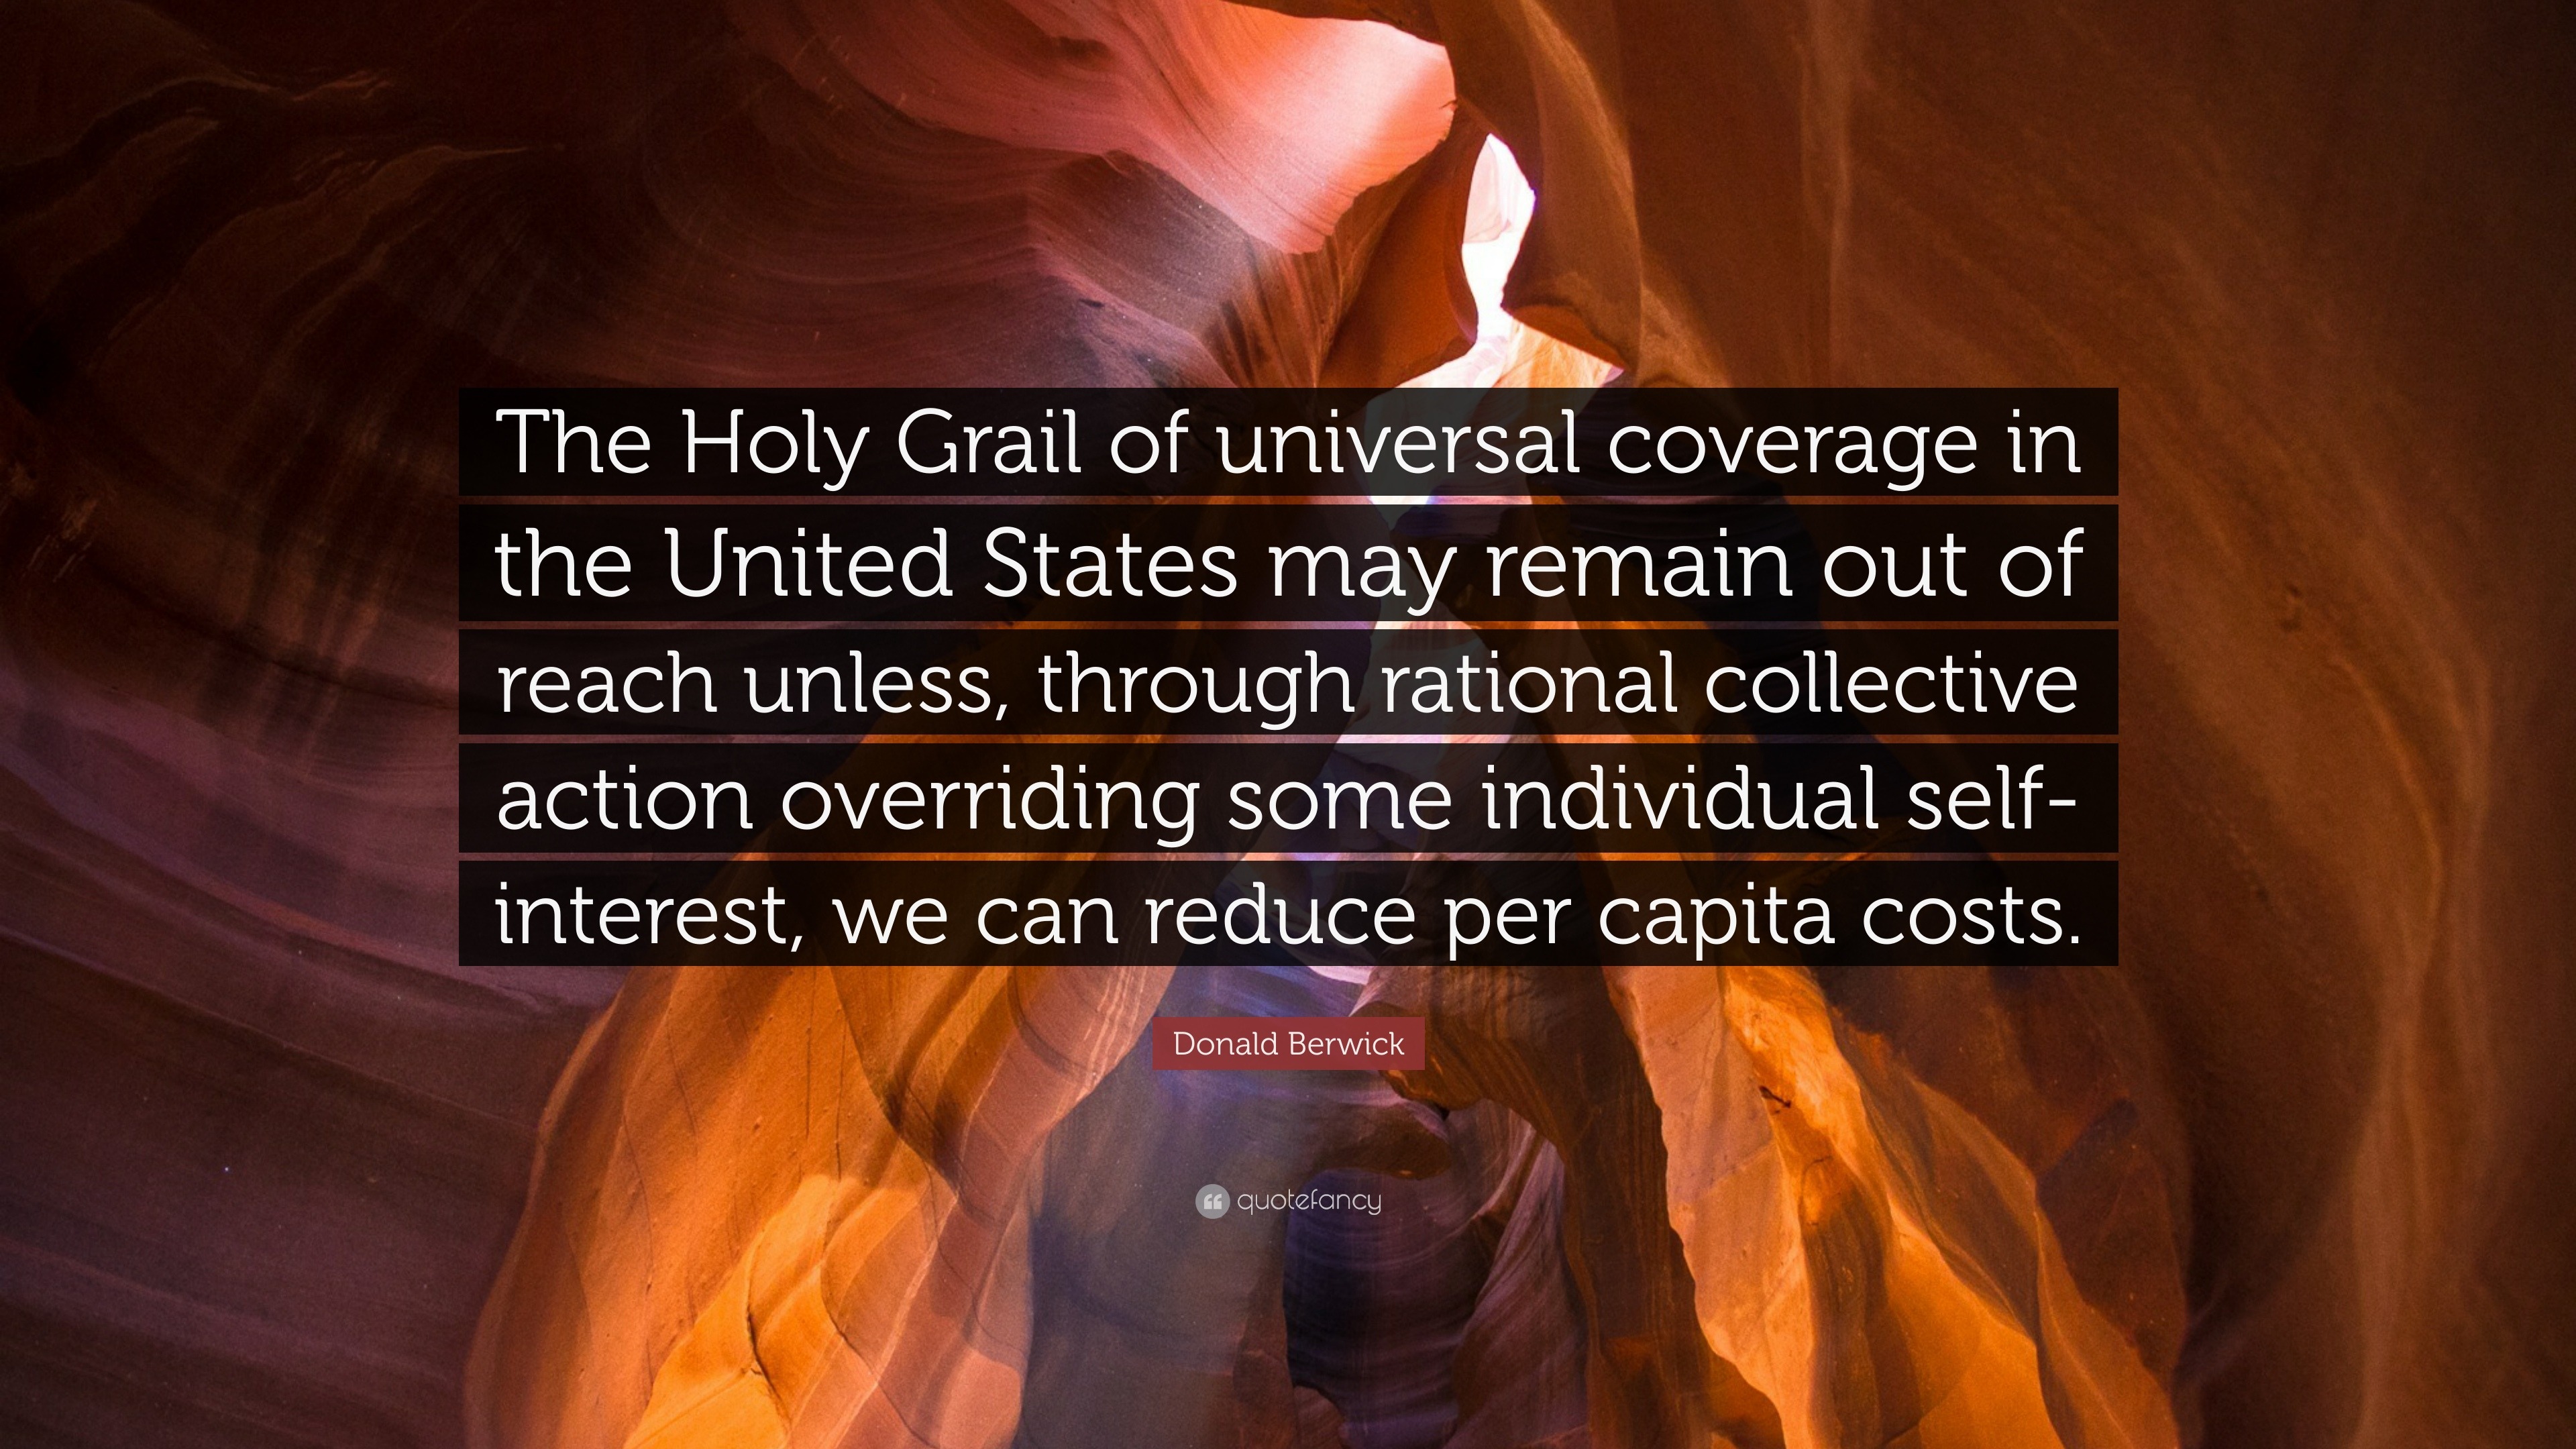 Donald Berwick Quote: “The Holy Grail of universal coverage in the United  States may remain out of reach unless, through rational collective ac...”  (7 wallpapers) - Quotefancy